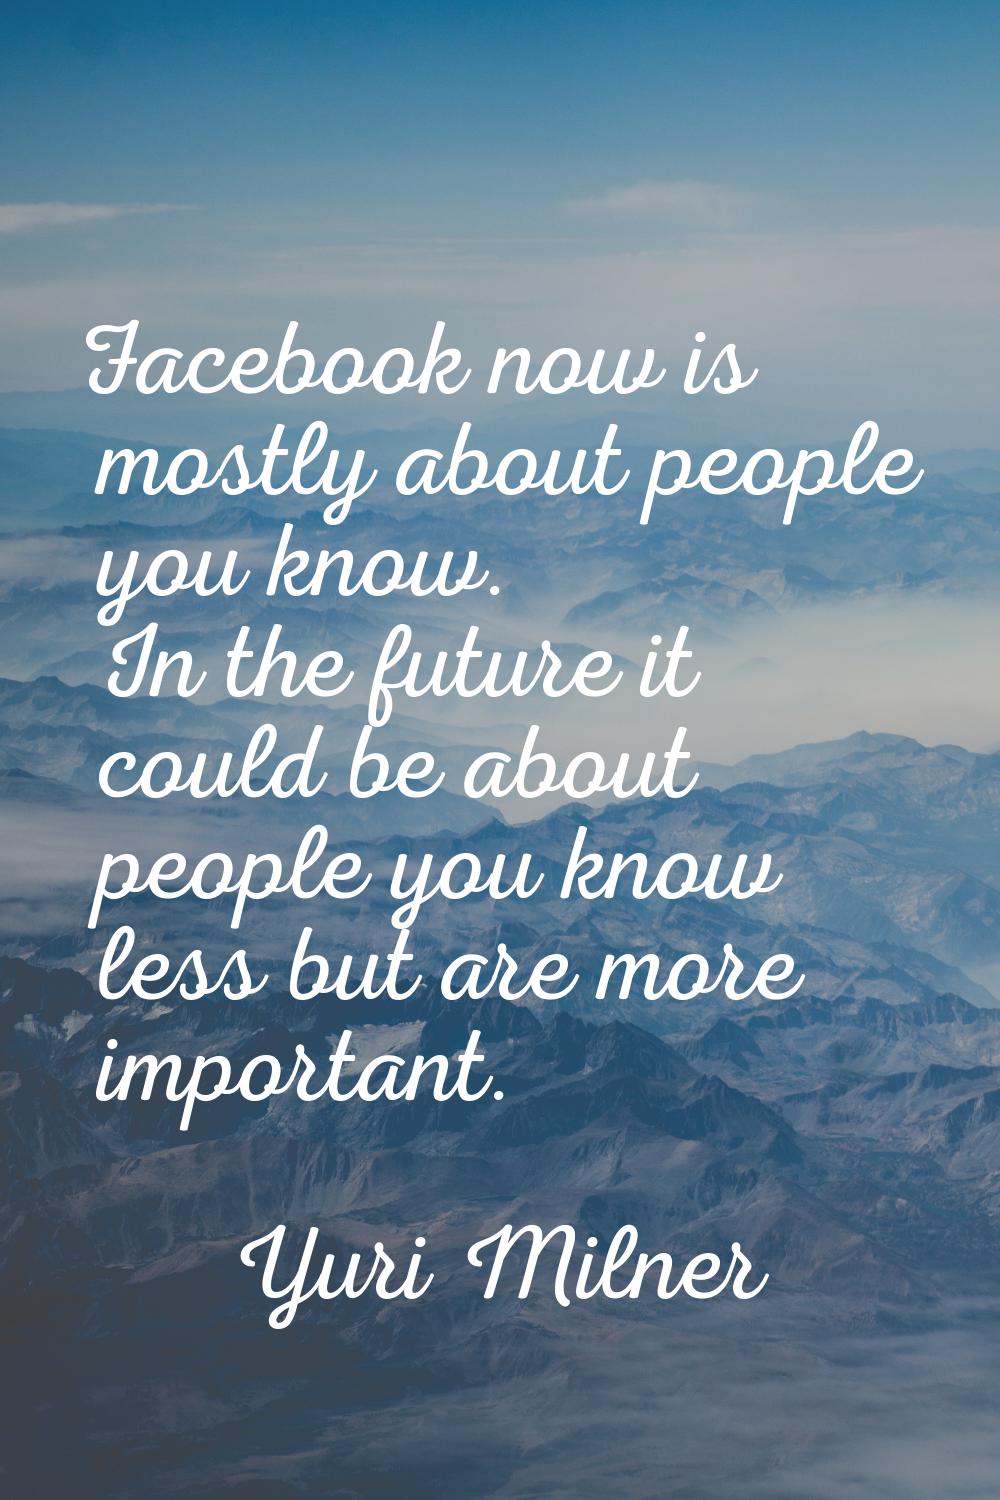 Facebook now is mostly about people you know. In the future it could be about people you know less 